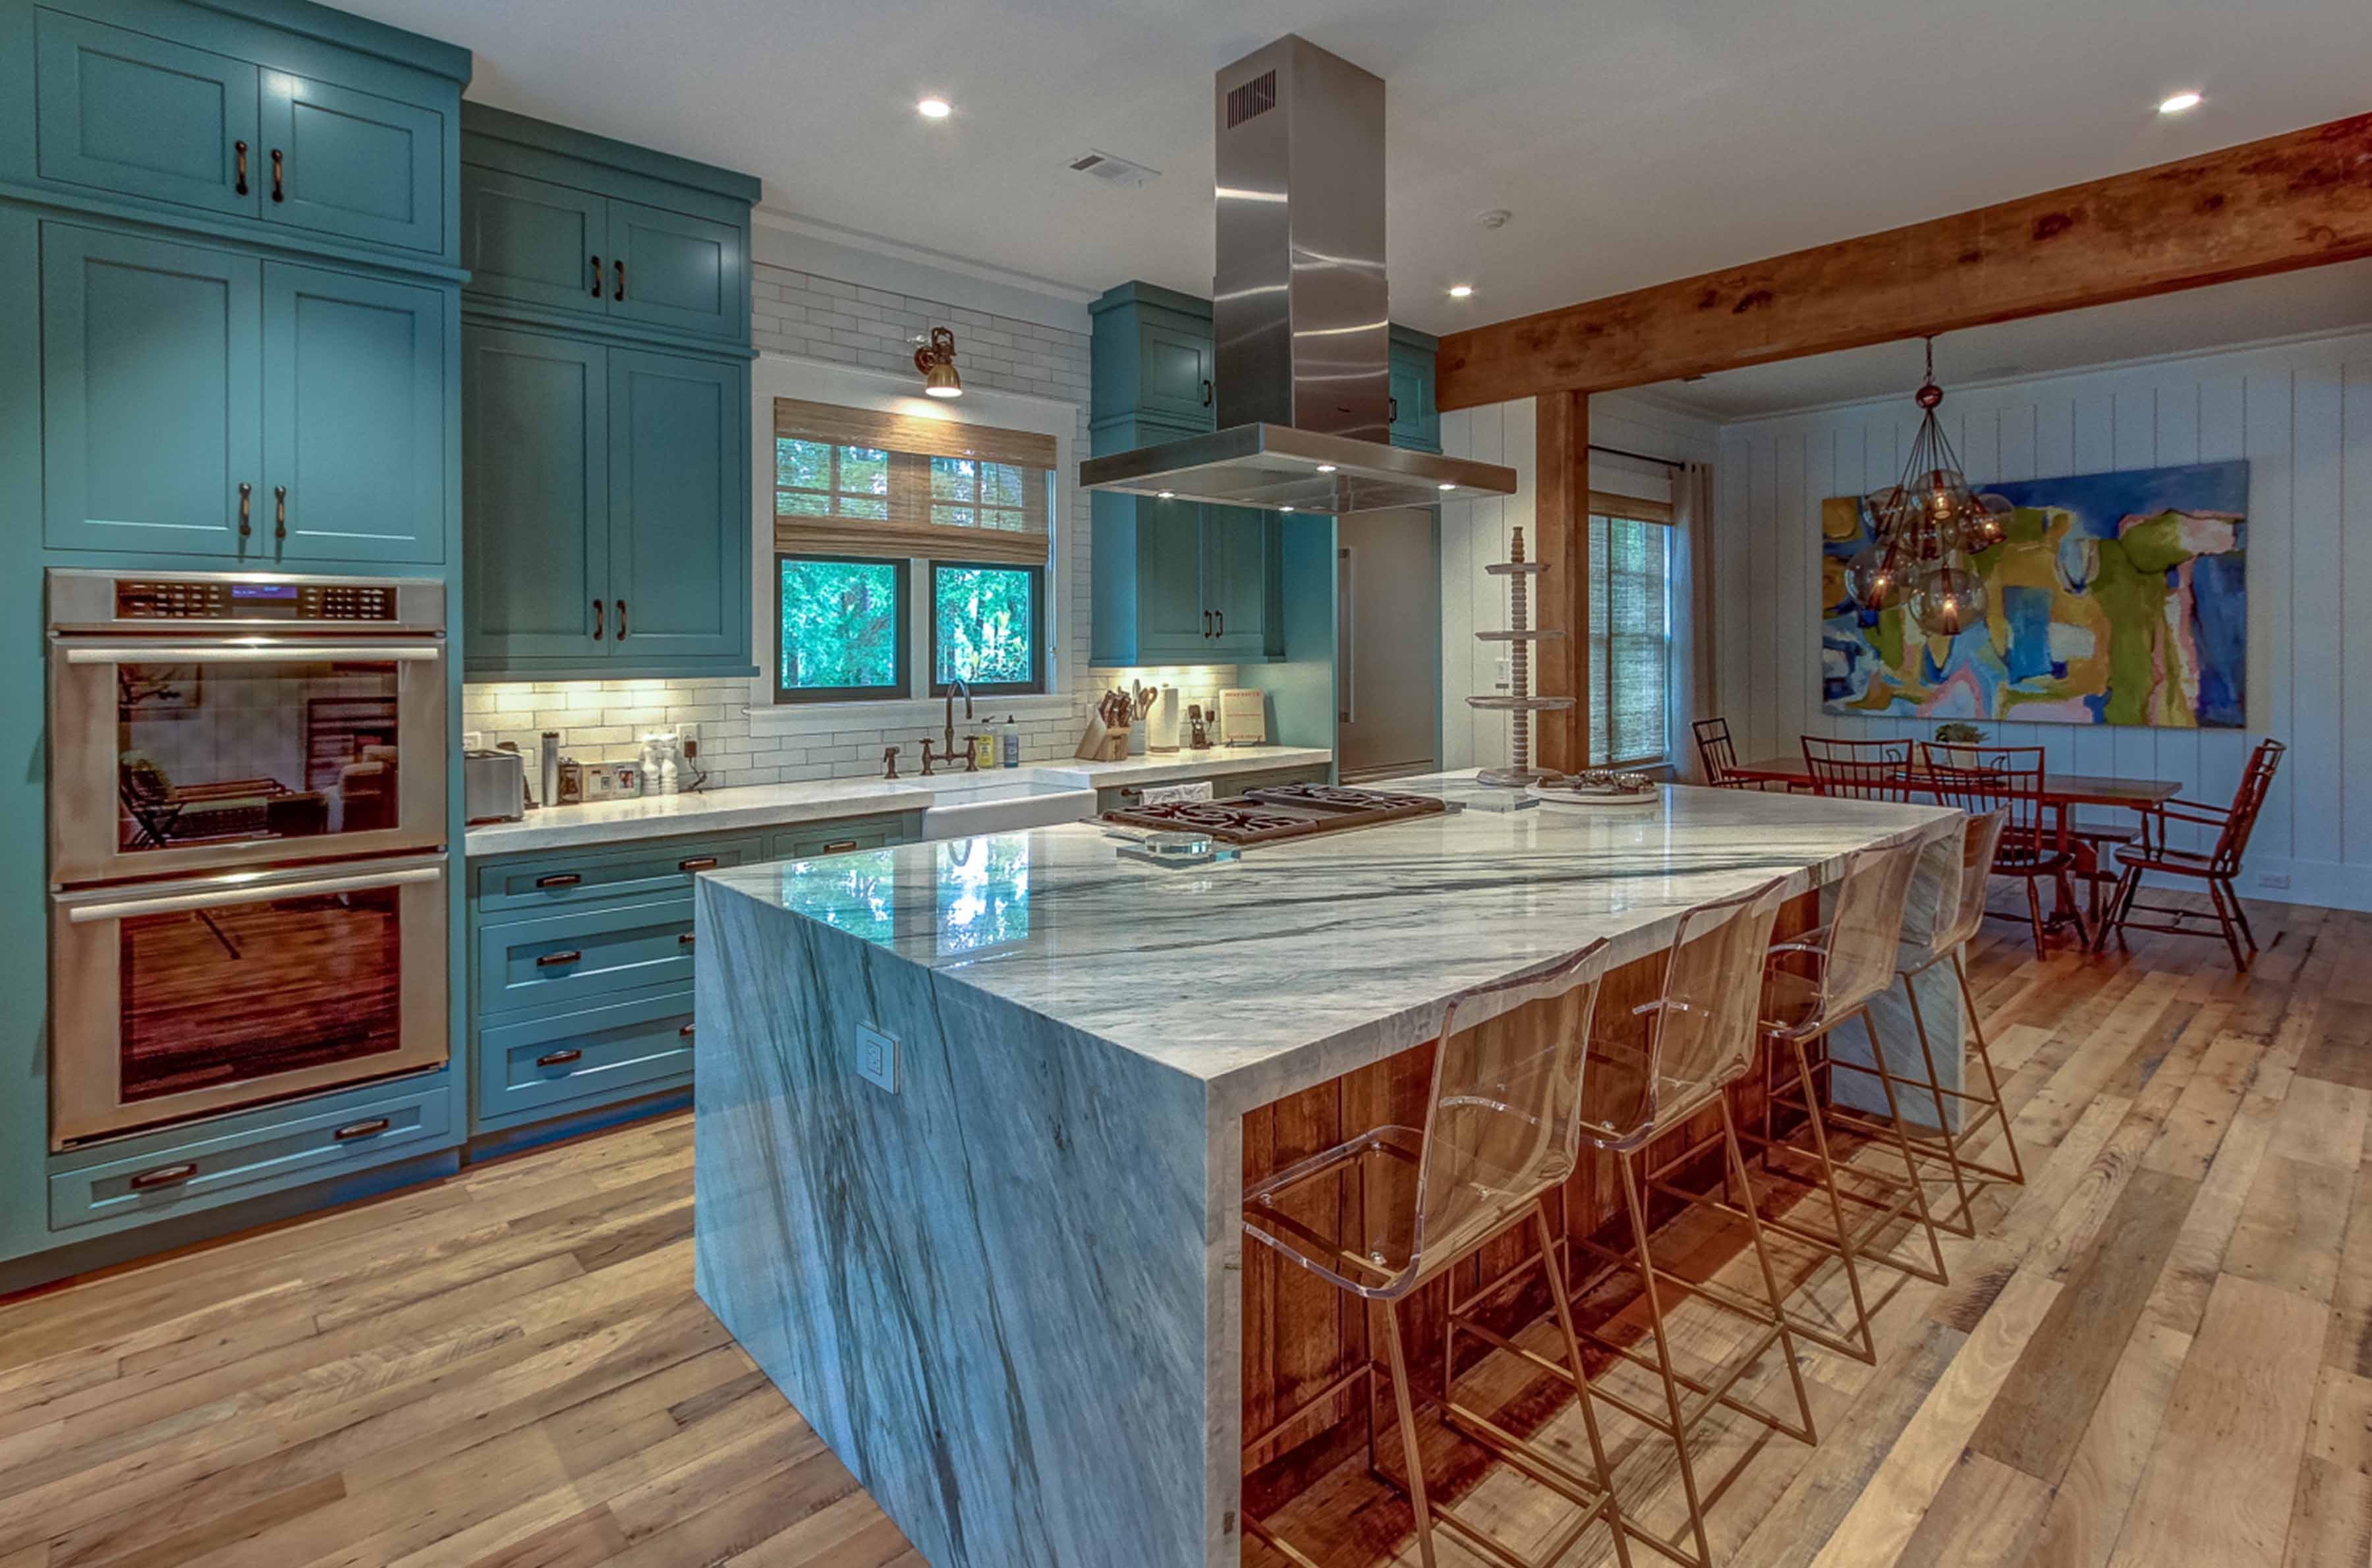 palmetto bluff home by Lisa Whitley for J Banks Design packed with personality thanks to the color of the cabinetry and striated stone